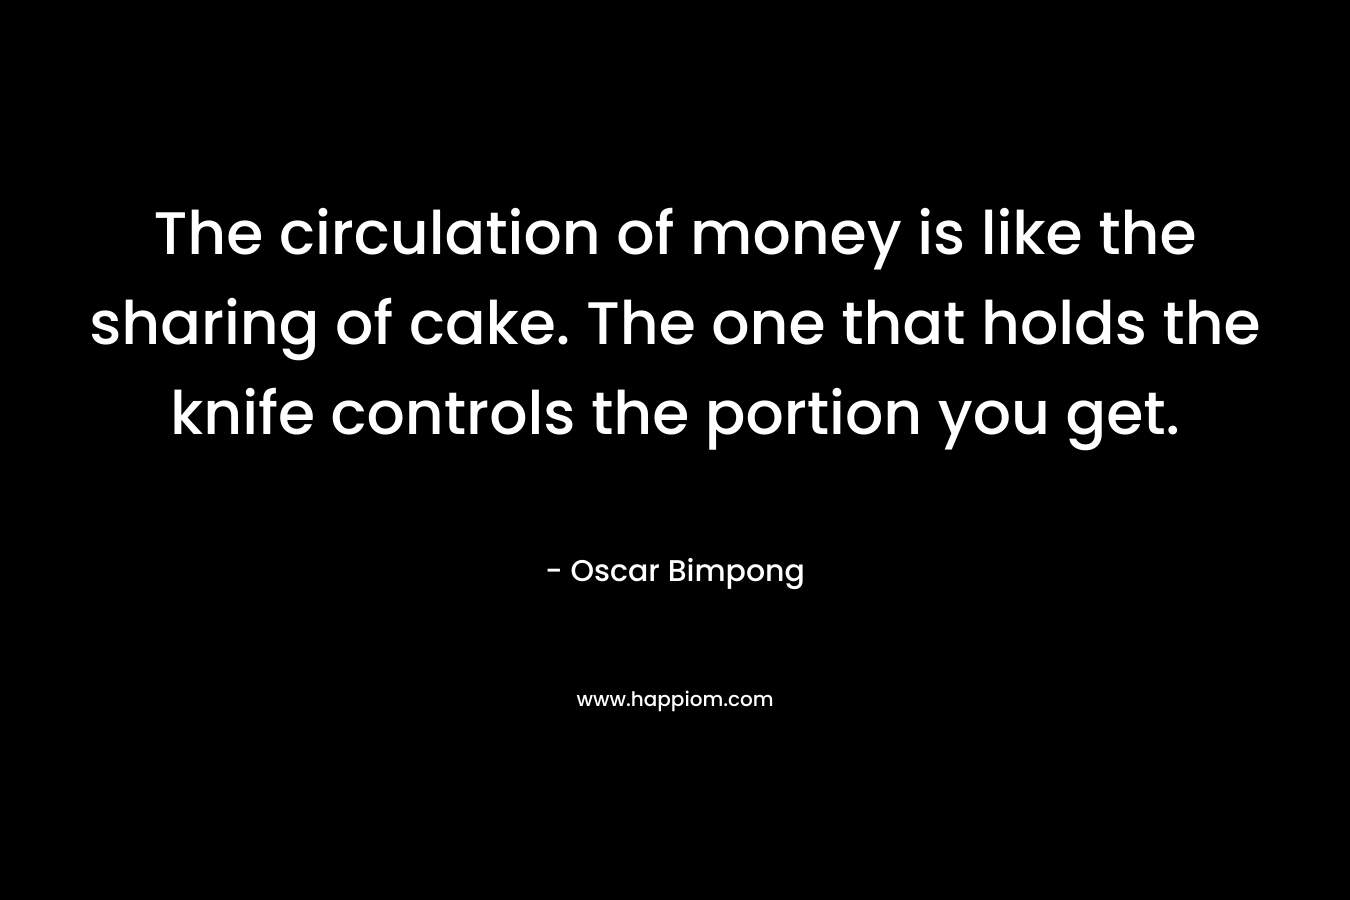 The circulation of money is like the sharing of cake. The one that holds the knife controls the portion you get. – Oscar Bimpong